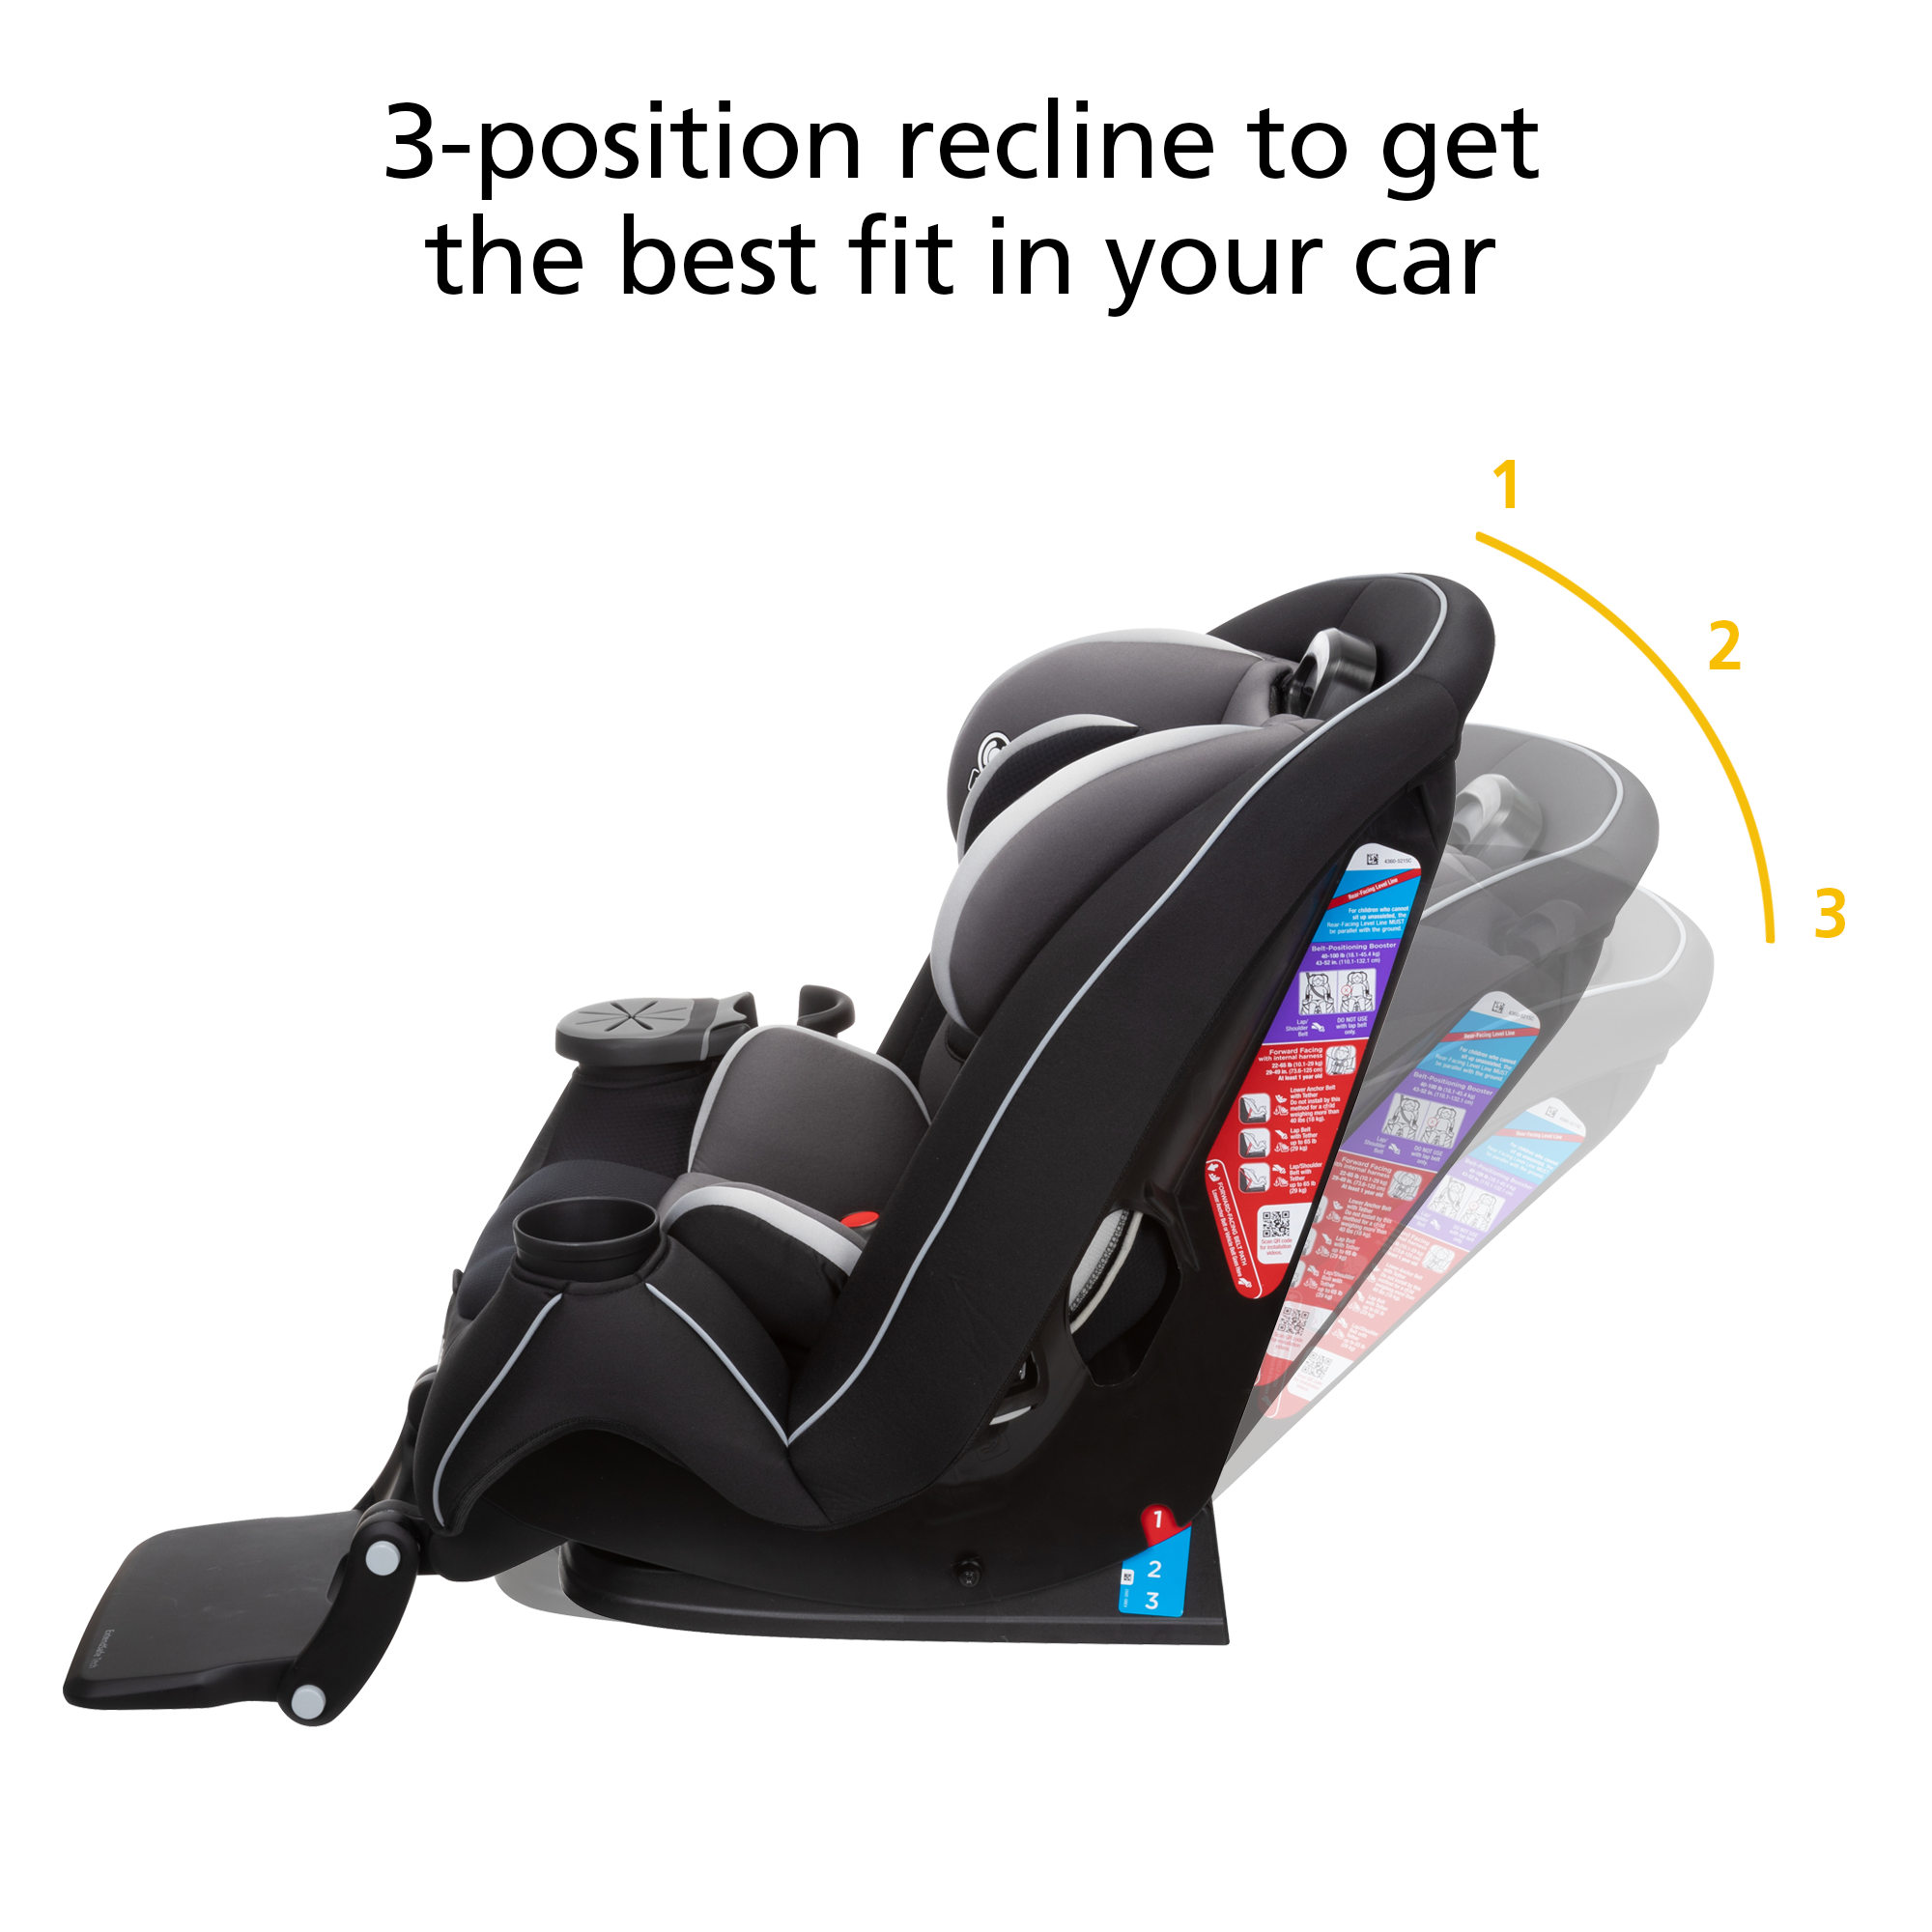 Grow and Go™ Extend 'n Ride LX - up to 5% more padding for added comfort on long car rides